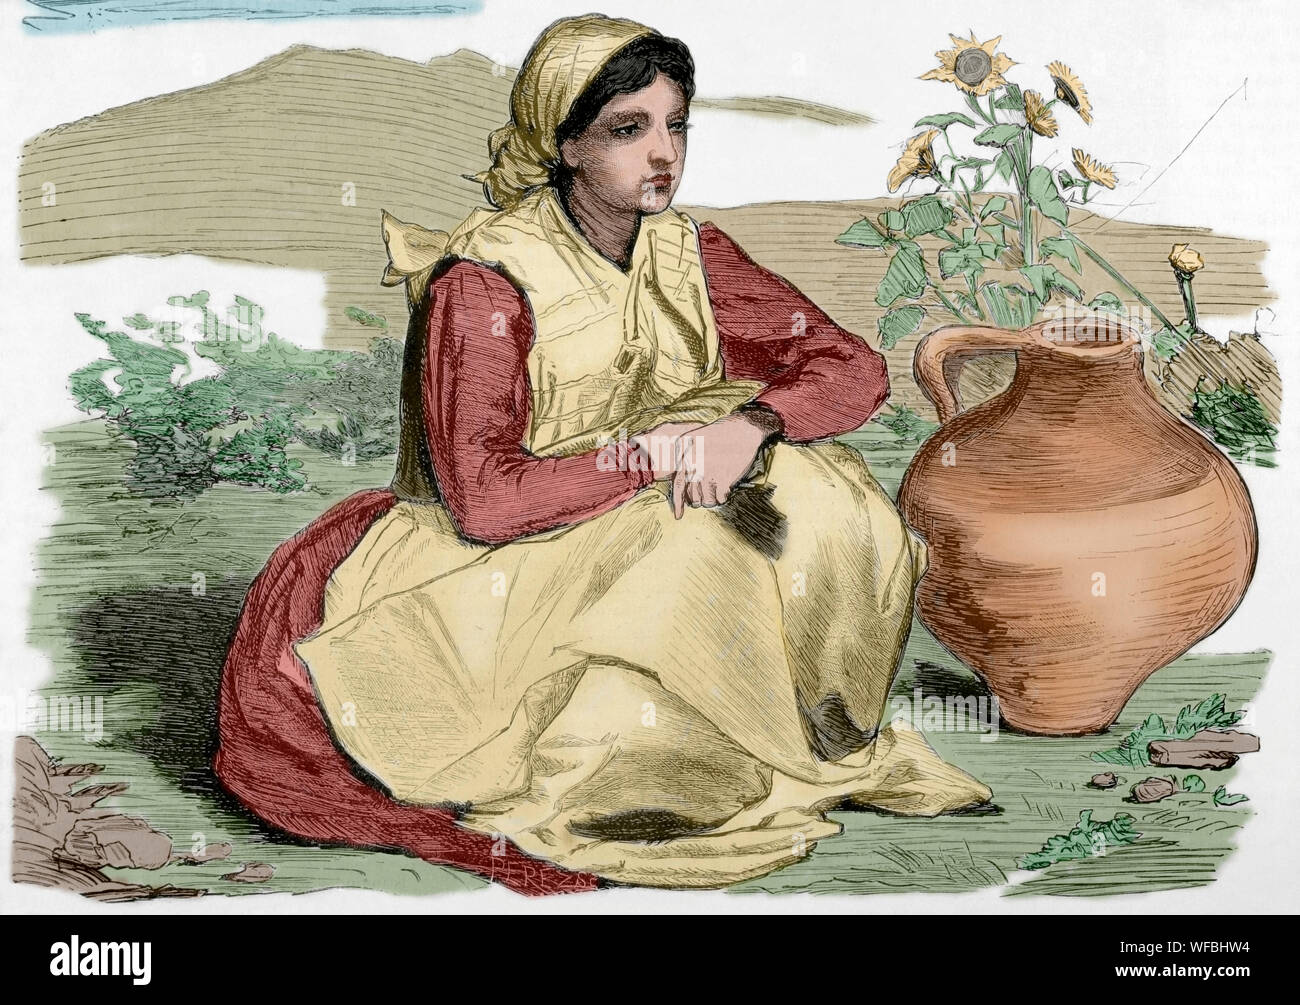 Spain. Types of Basque provinces. Woman with traditional dress. Unpublished sketches of Valeriano Becquer. Engraving. La Ilustracion Española y Americana, January 15, 1876. Later colouration. Stock Photo